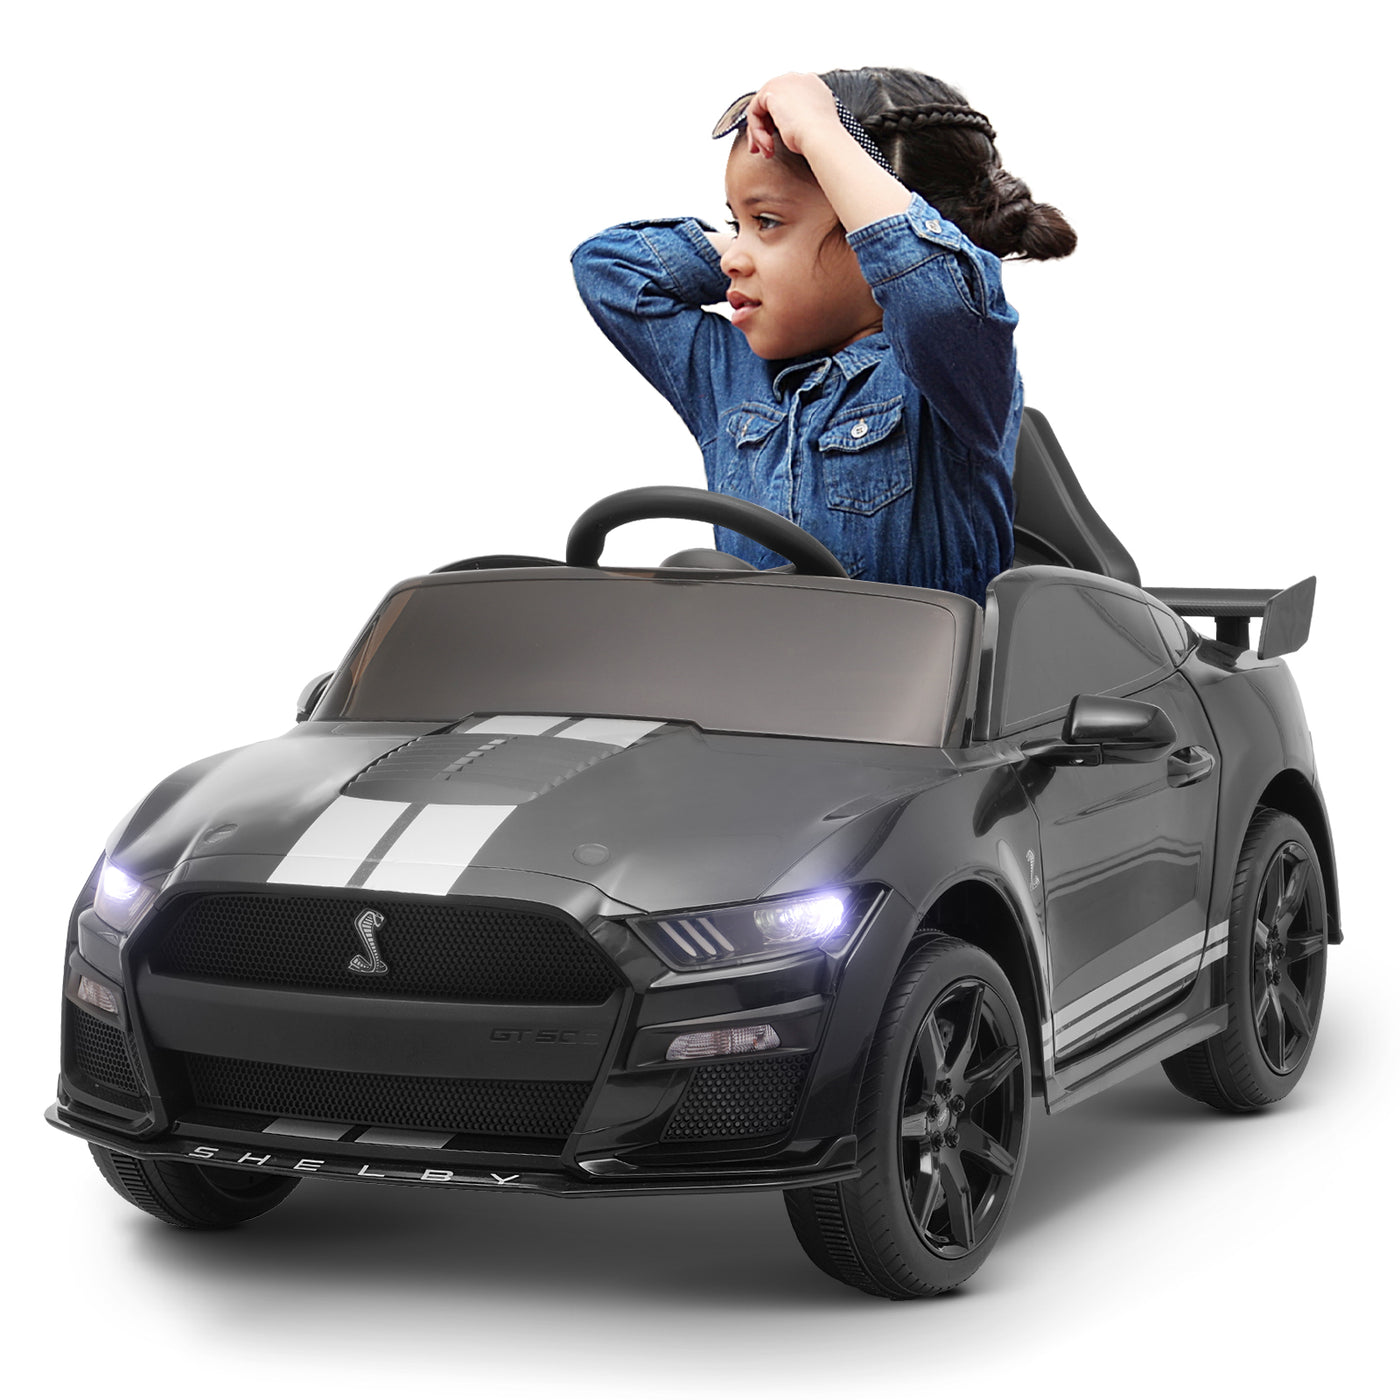 Blitzshark 12V Kids Ride on Car Licensed Ford Mustang Shelby GT500 Electric Vehicle for Kids 7AH Big Battery Powered Car, with 2.4G Remote Control, Safety Belt, Bright Headlights, Music & FM